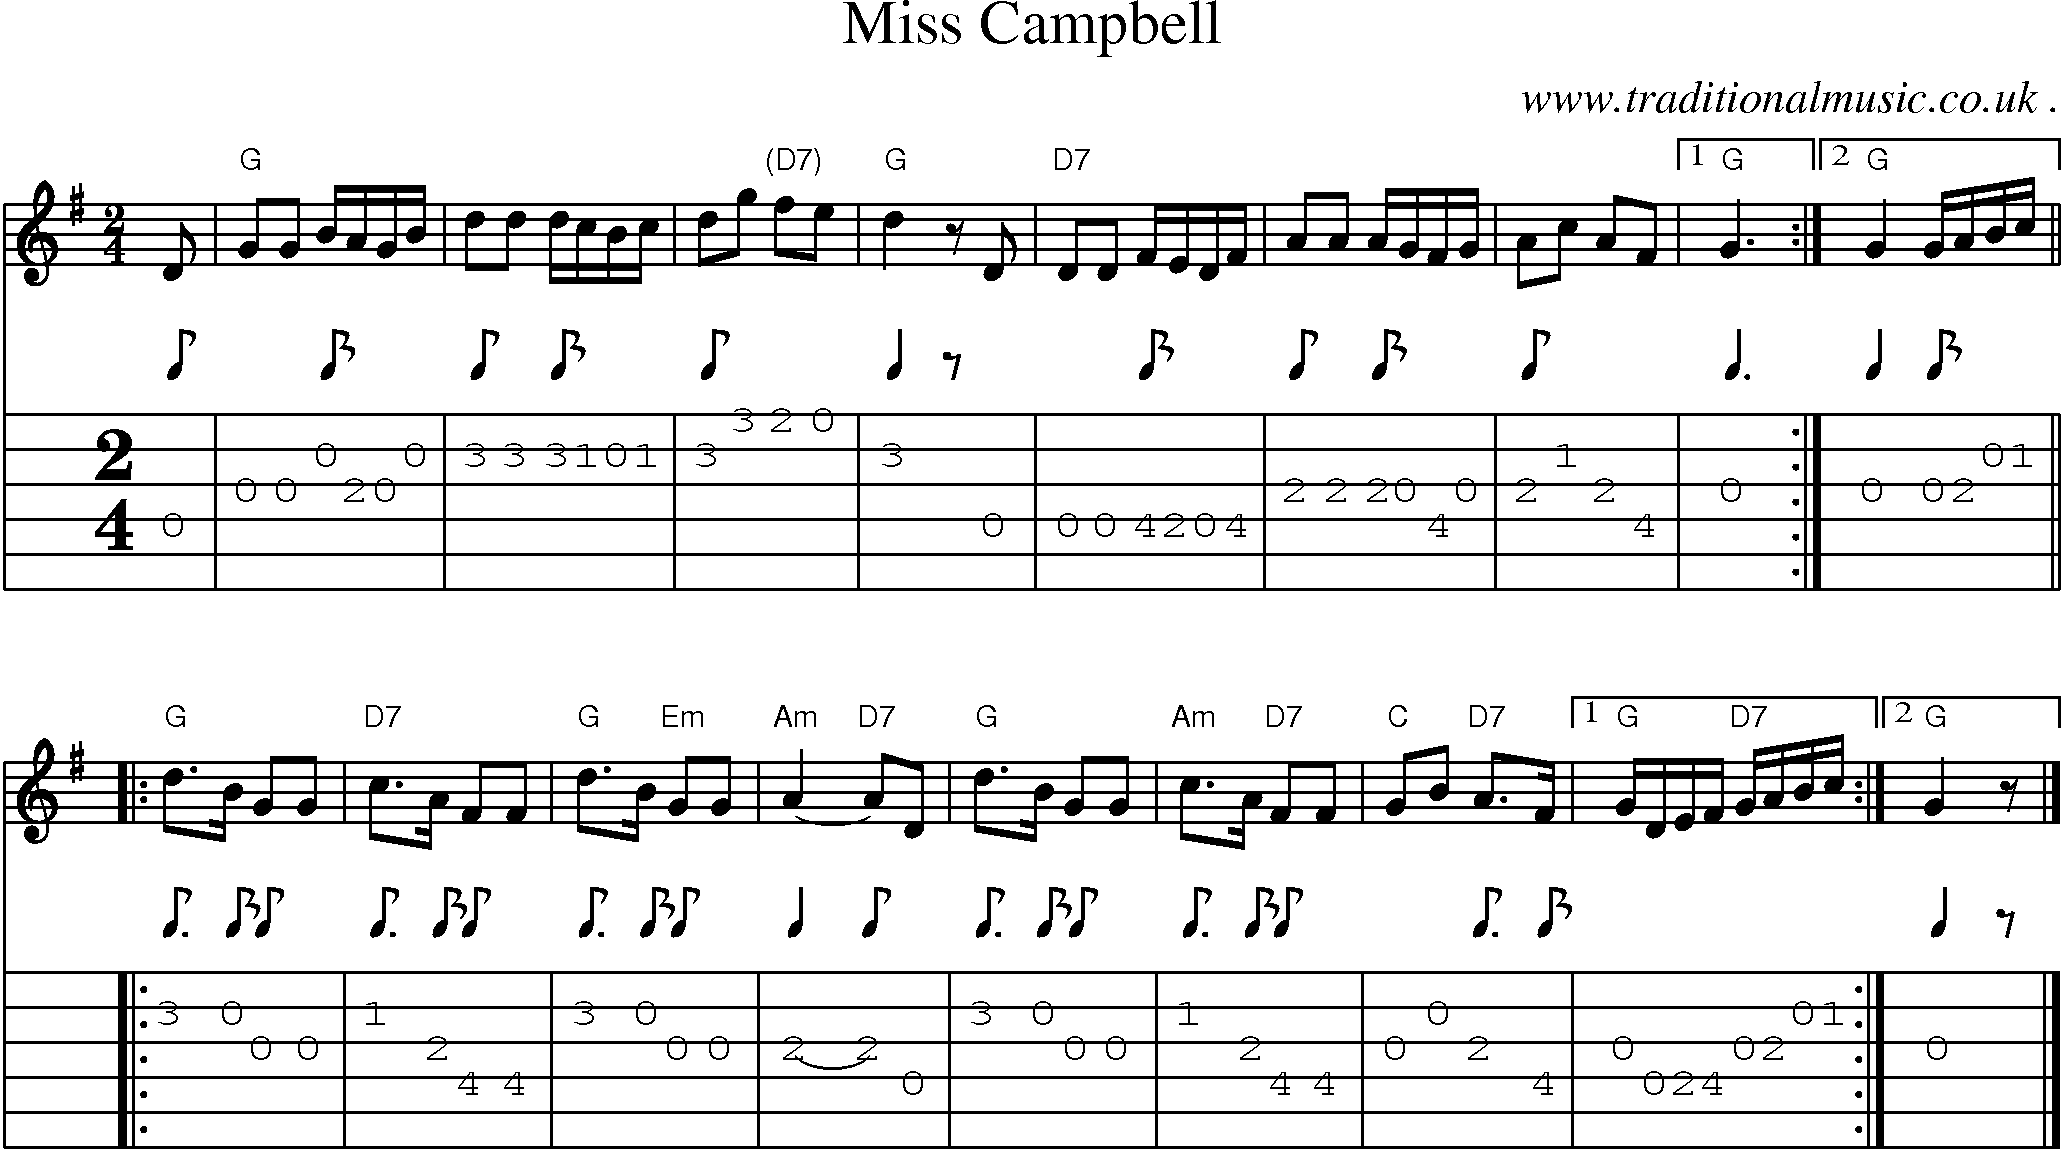 Sheet-music  score, Chords and Guitar Tabs for Miss Campbell